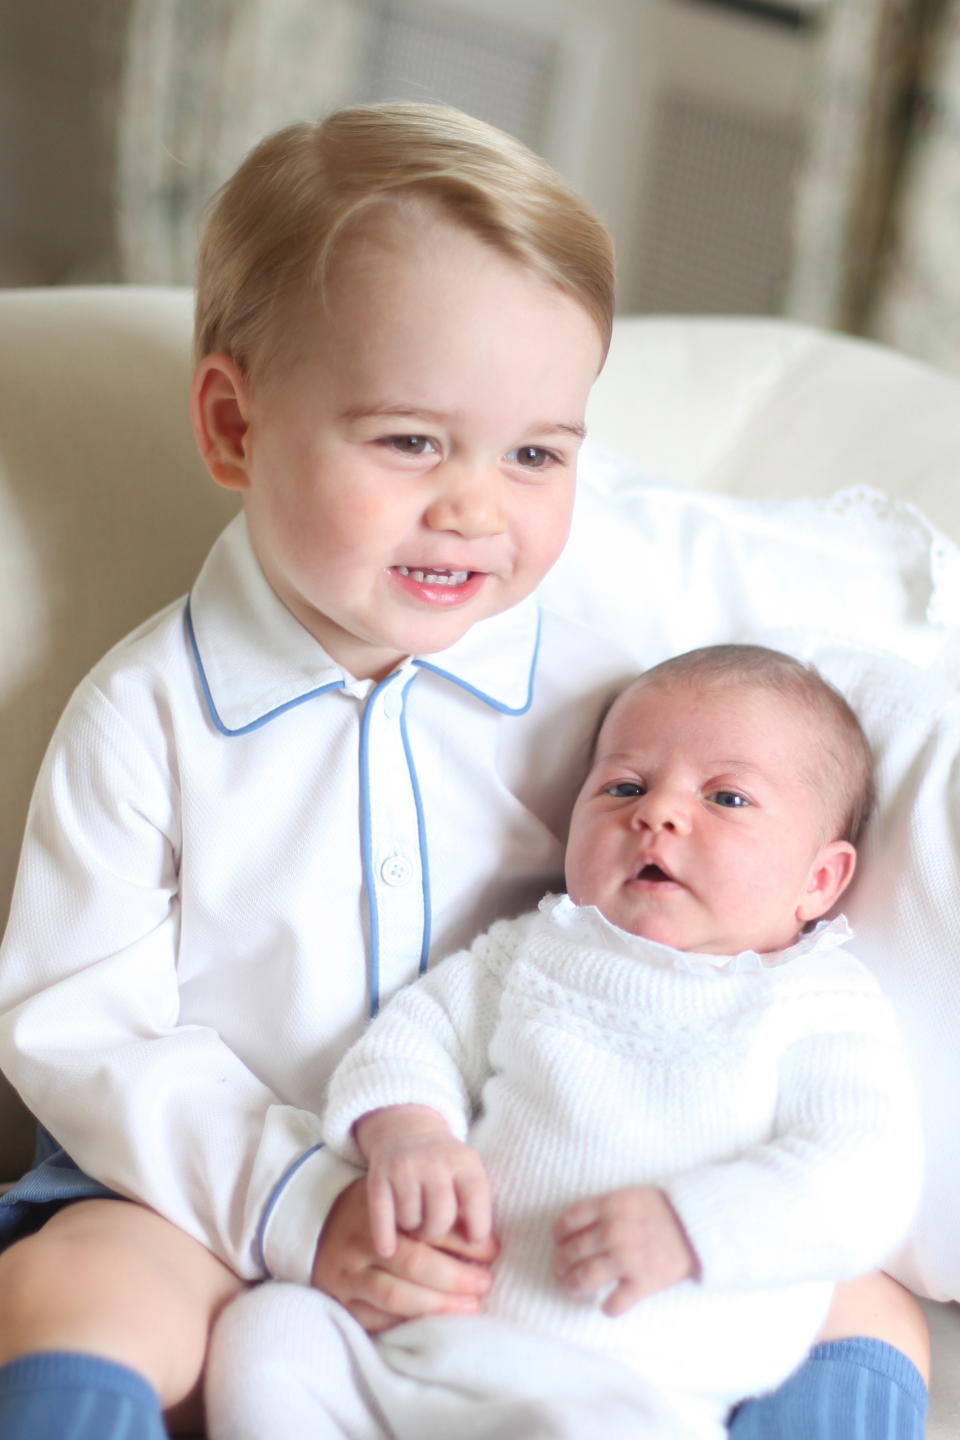 Prince George and Princess Charlotte in a photo taken by the Duchess of Cambridge in mid-May 2015 at Anmer Hall in Norfolk.